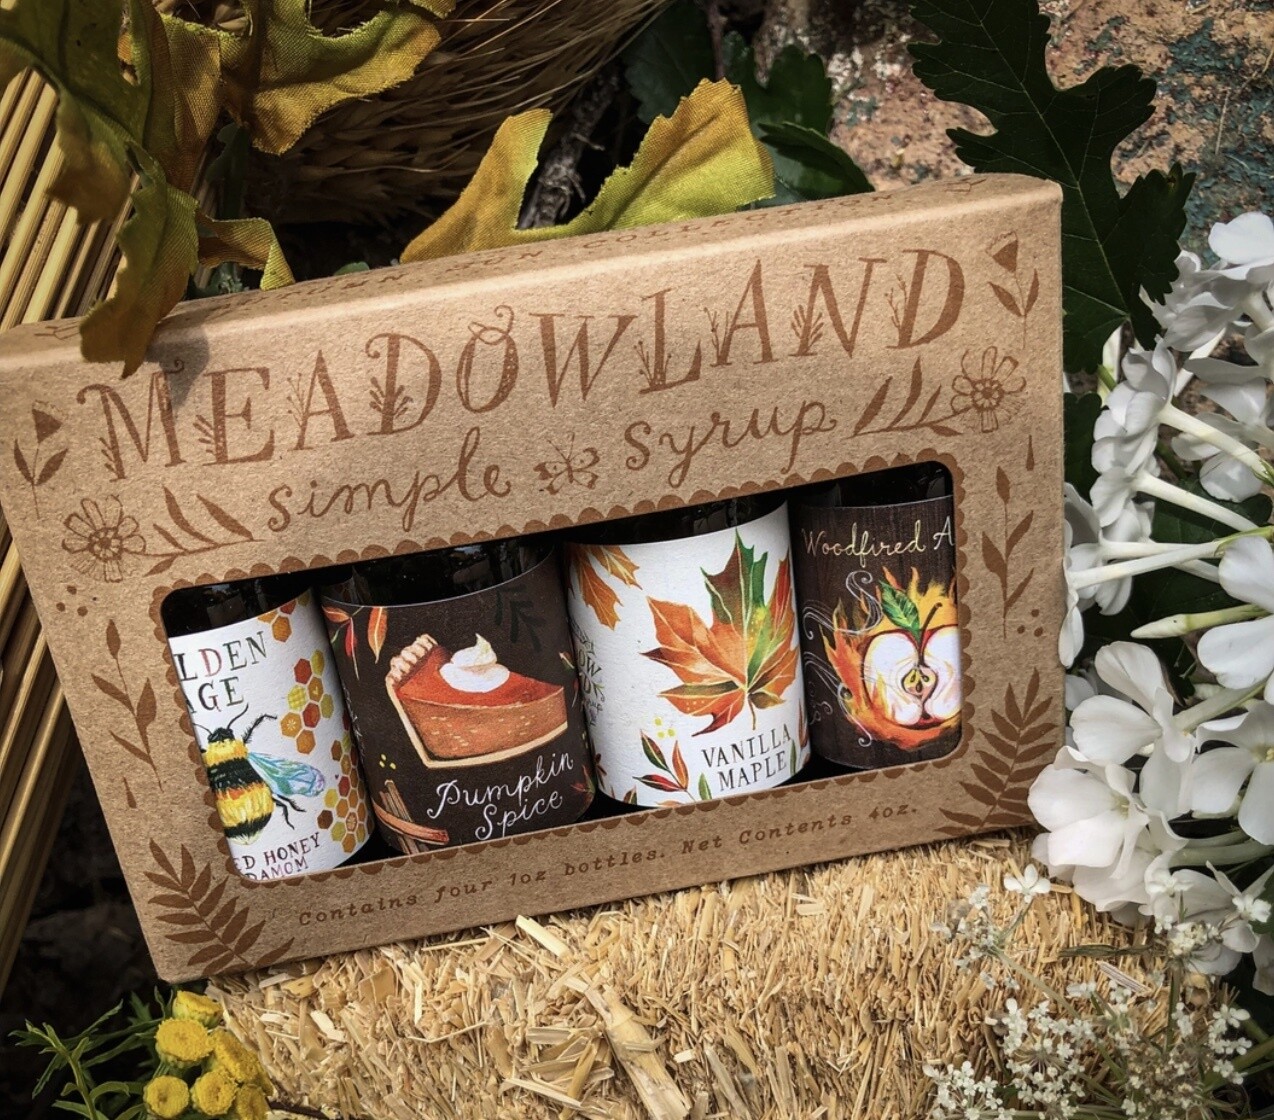 Autumn Sun Collection - Simple Syrup Sampler by Meadowland